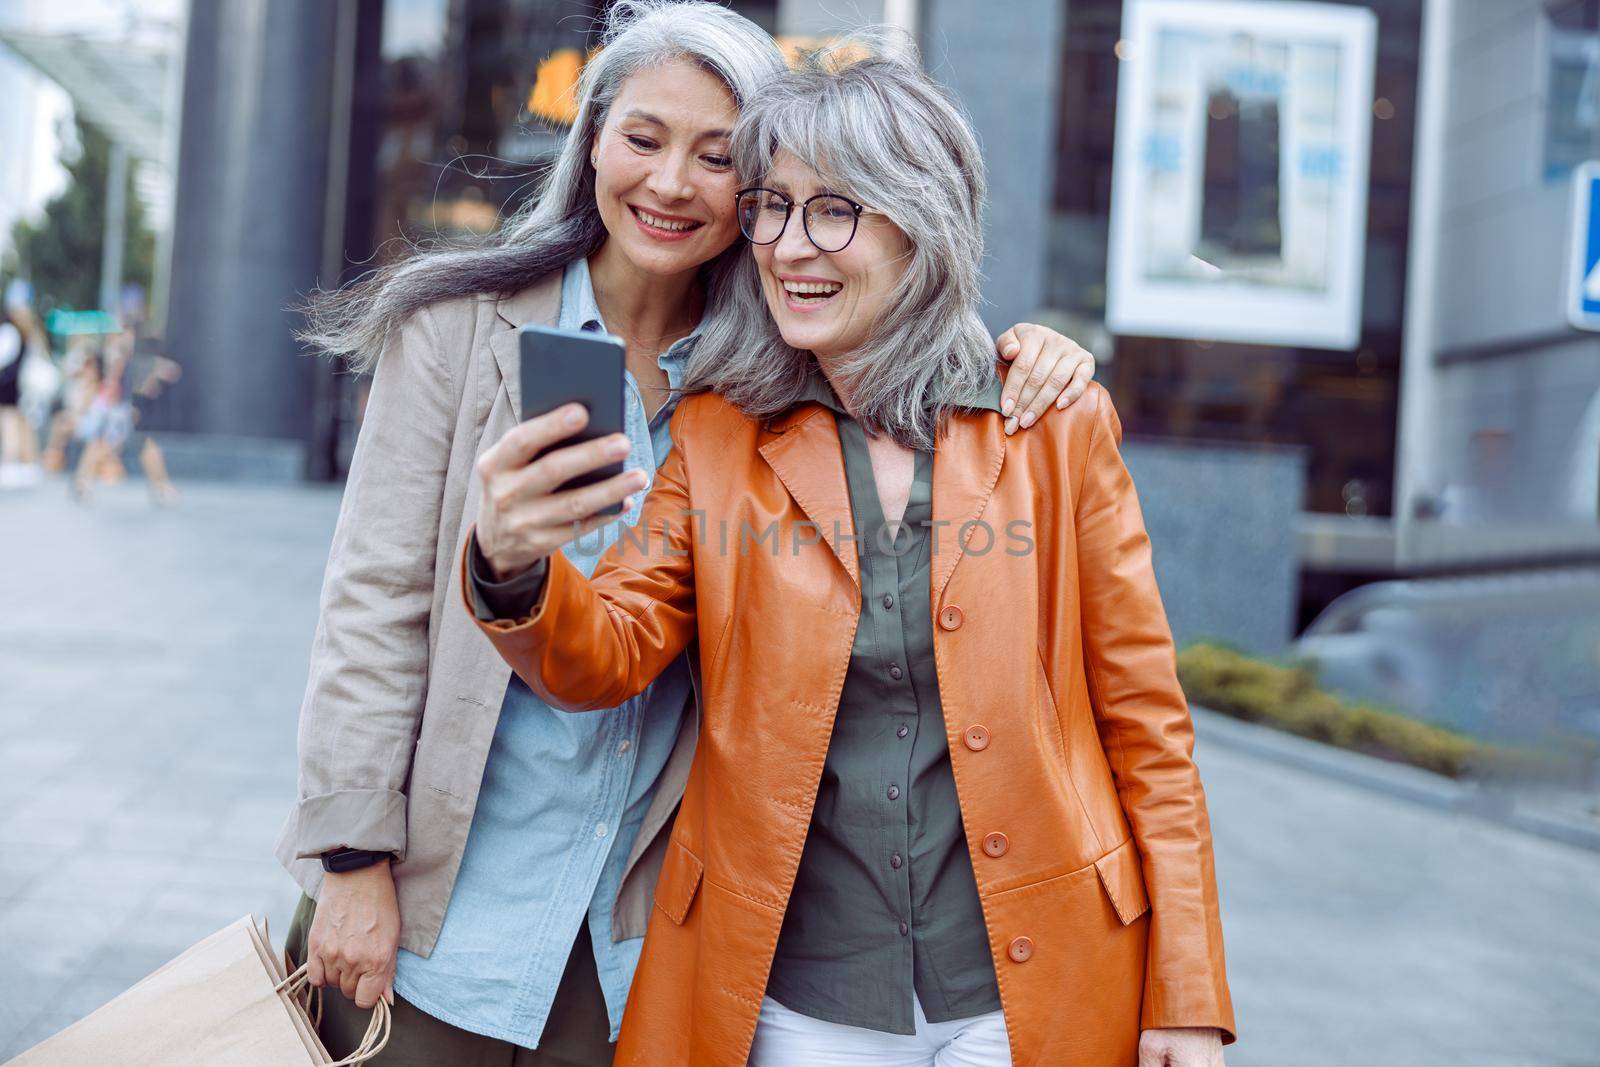 Smiling silver haired lady in brown leather jacket and companion with shopping bags take selfie on modern city street on autumn day. Friends spend time together